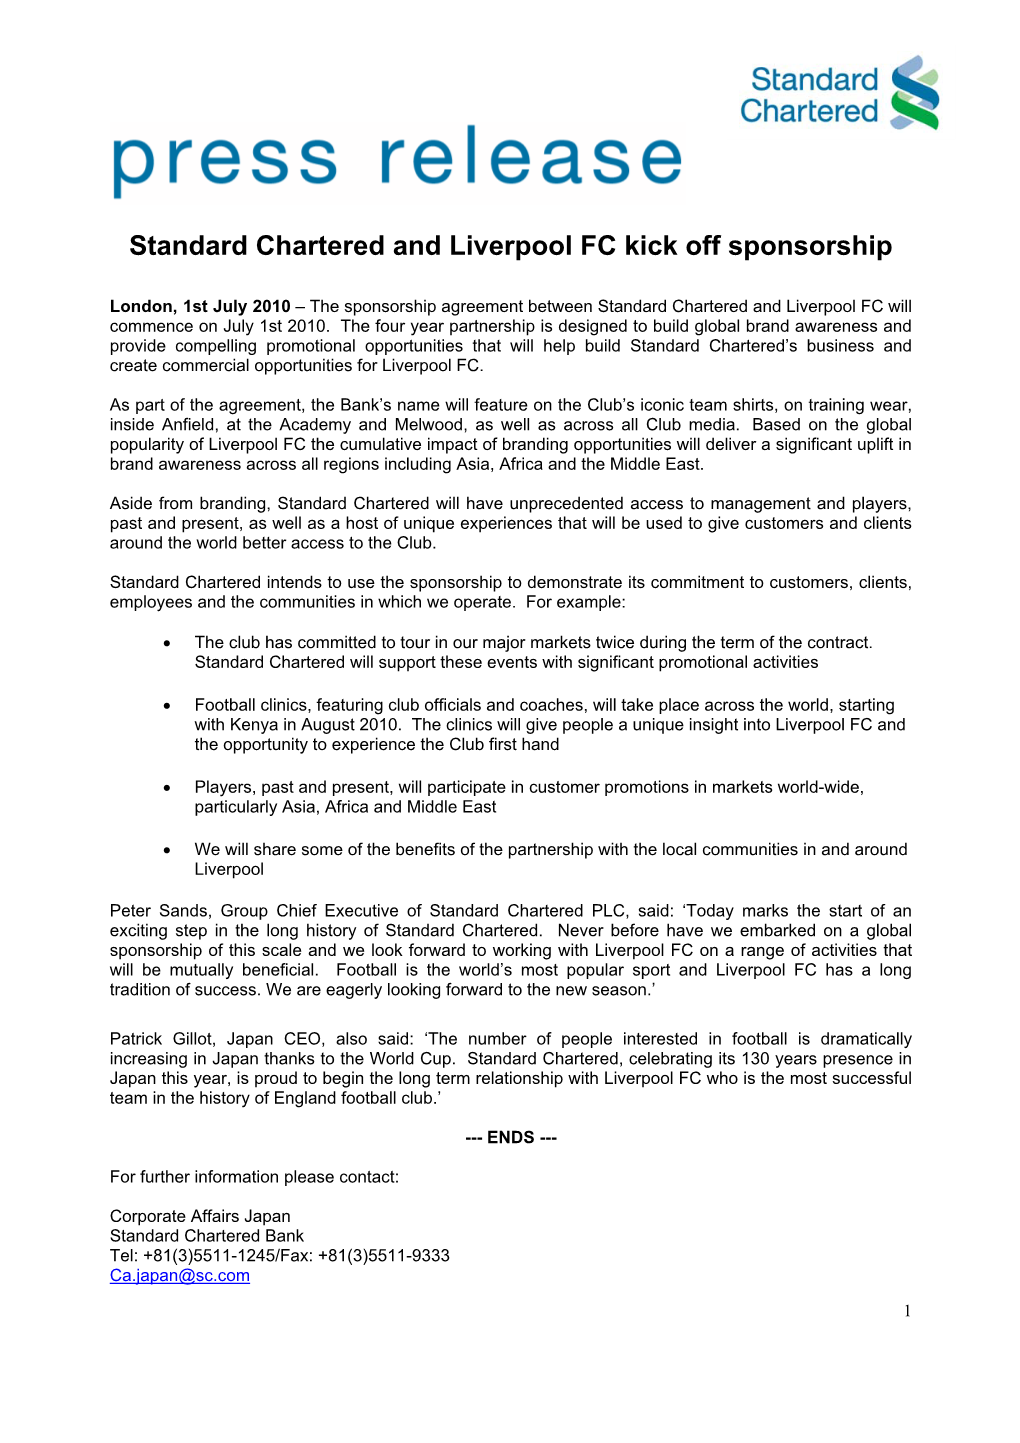 Standard Chartered and Liverpool FC Kick Off Sponsorship